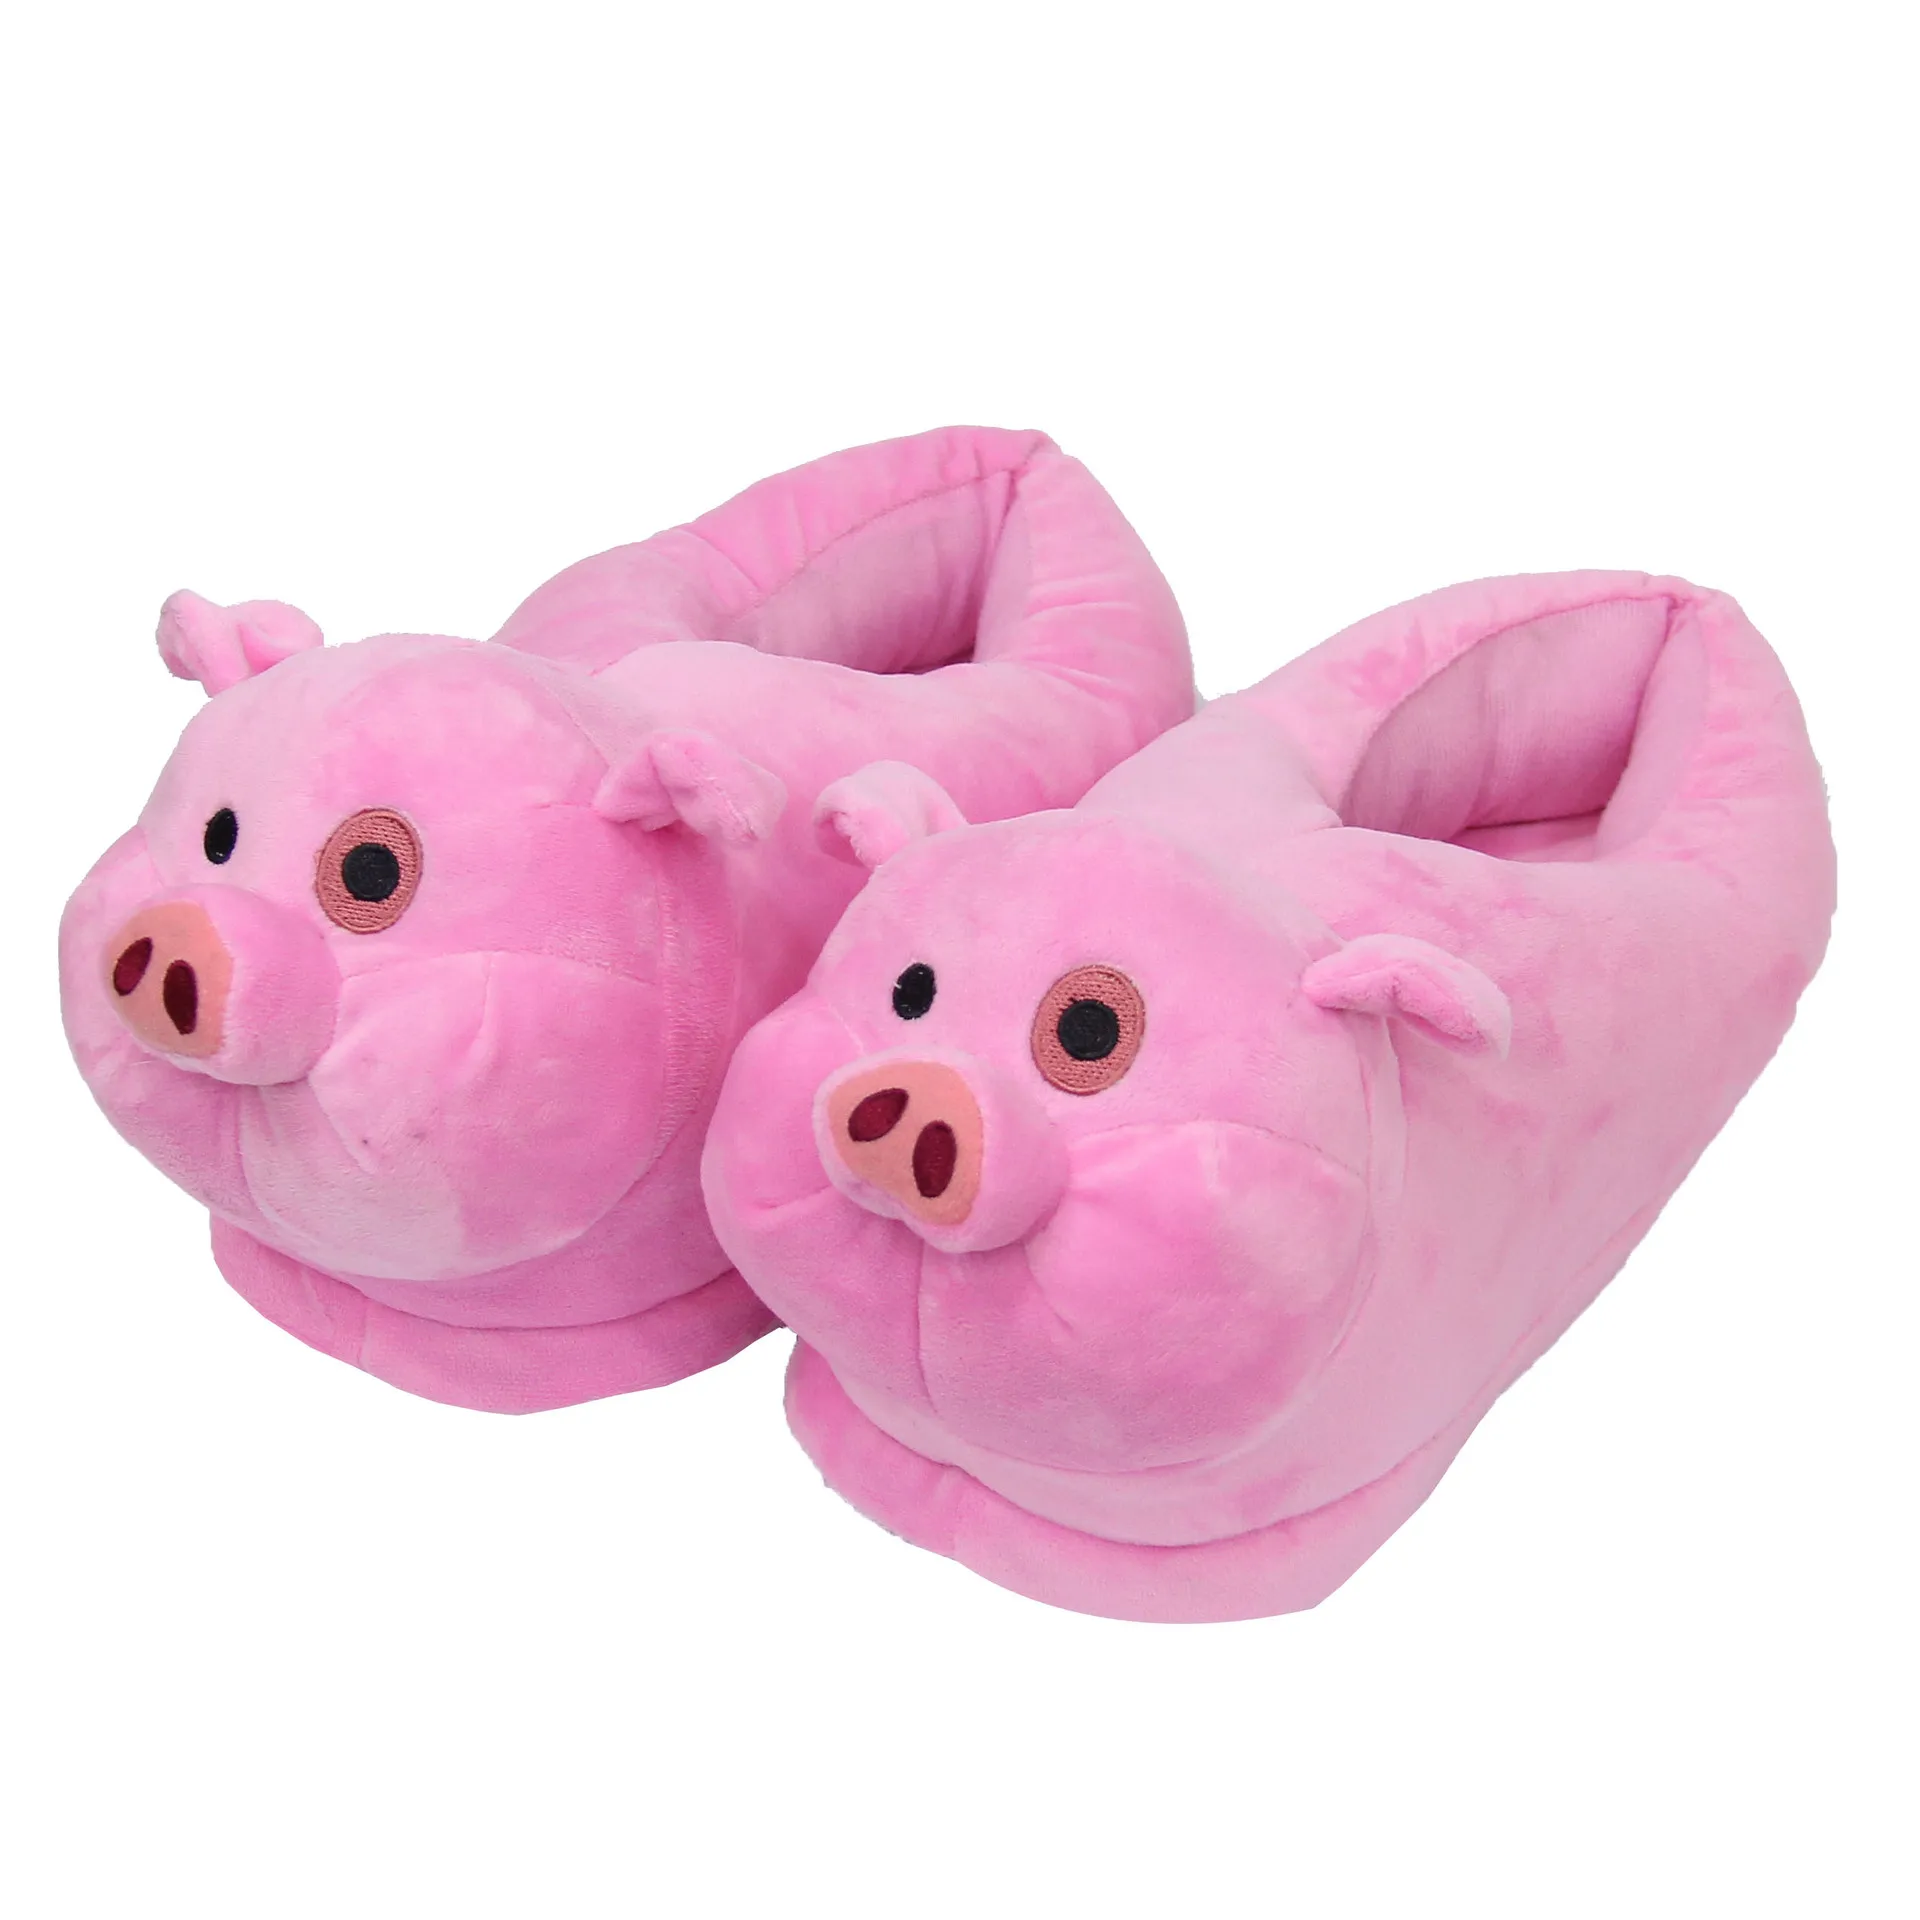 

Anime Cartoon Gravity Cosplay Falls Waddles Pig Slippers Kawaii Cute Soft Warm Fans Collection Props